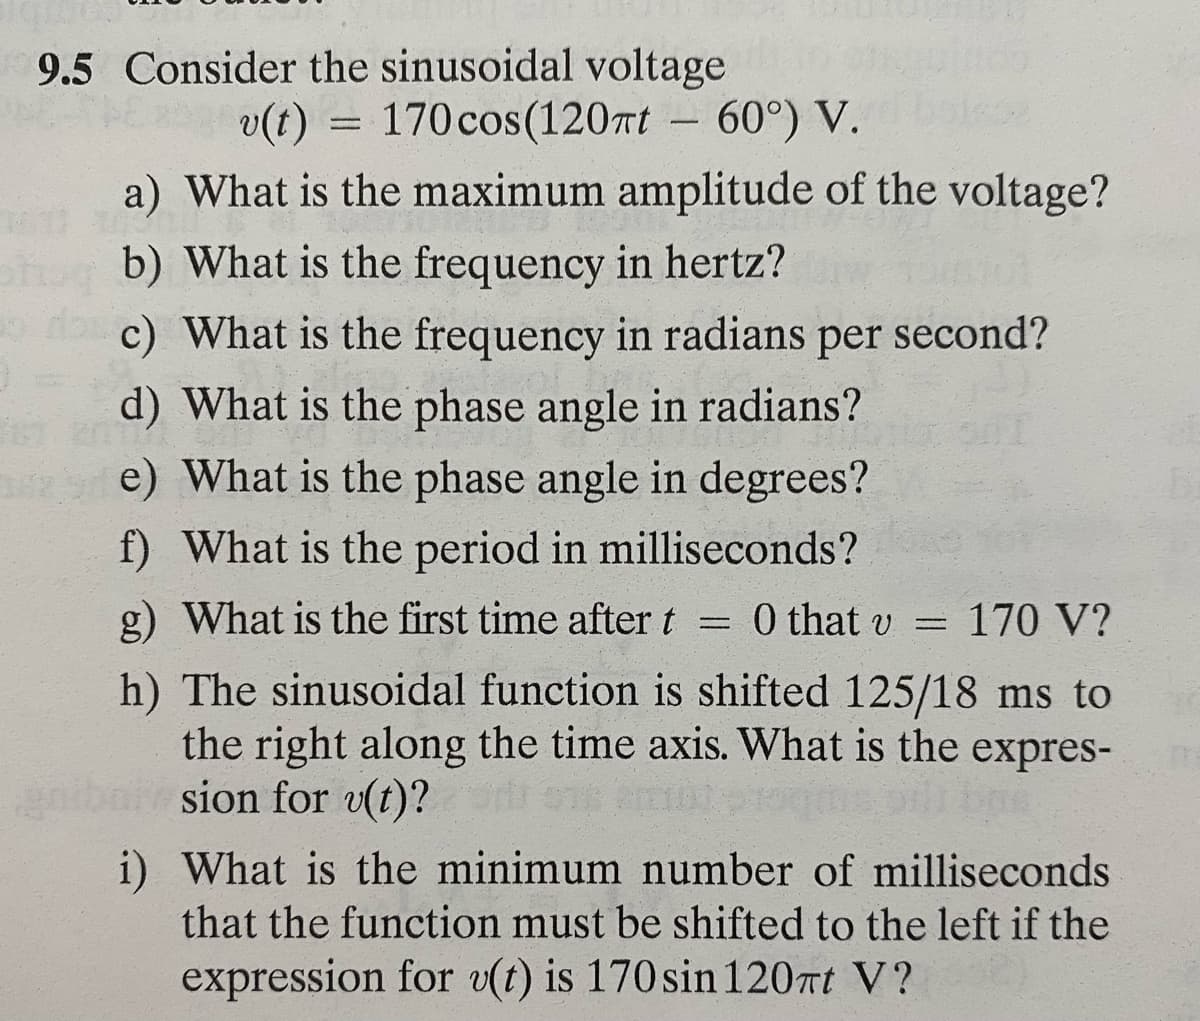 3
9.5 Consider the sinusoidal voltage
v(t)
170 cos(120πt
60°) V.
a) What is the maximum amplitude of the voltage?
b) What is the frequency in hertz?
c) What is the frequency in radians per second?
d) What is the phase angle in radians?
e) What is the phase angle in degrees?
f) What is the period in milliseconds?
g) What is the first time after t = 0 that v = 170 V?
=
h) The sinusoidal function is shifted 125/18 ms to
the right along the time axis. What is the expres-
sion for v(t)?
i) What is the minimum number of milliseconds
that the function must be shifted to the left if the
expression for v(t) is 170 sin 120πt V?